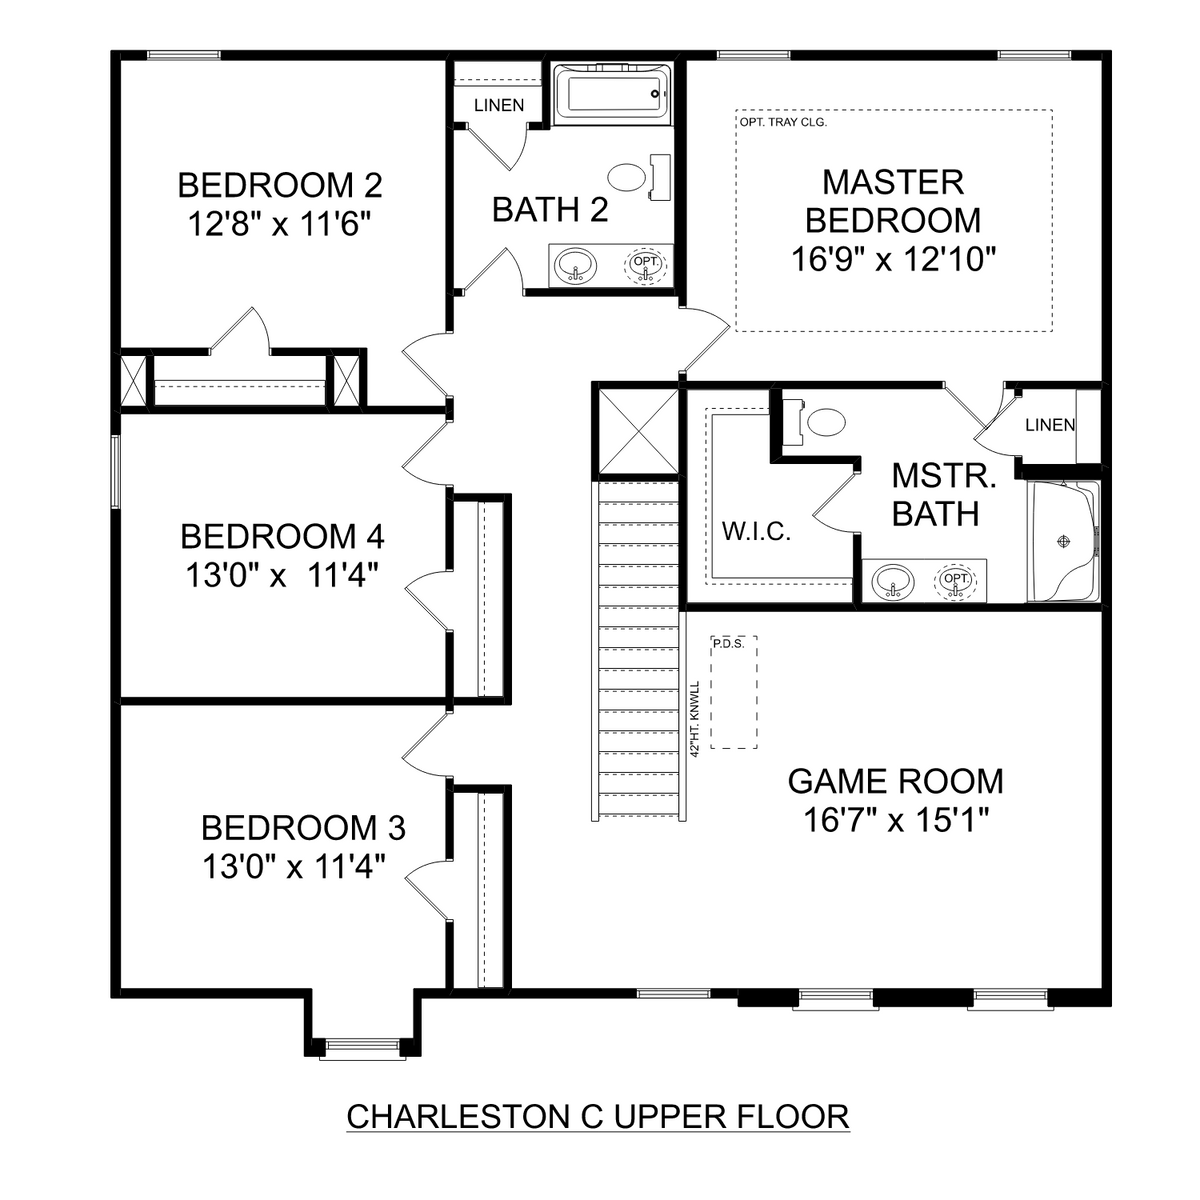 2 - The Charleston C floor plan layout for 183 Beaver Brook Place in Davidson Homes' Ivy Hills community.